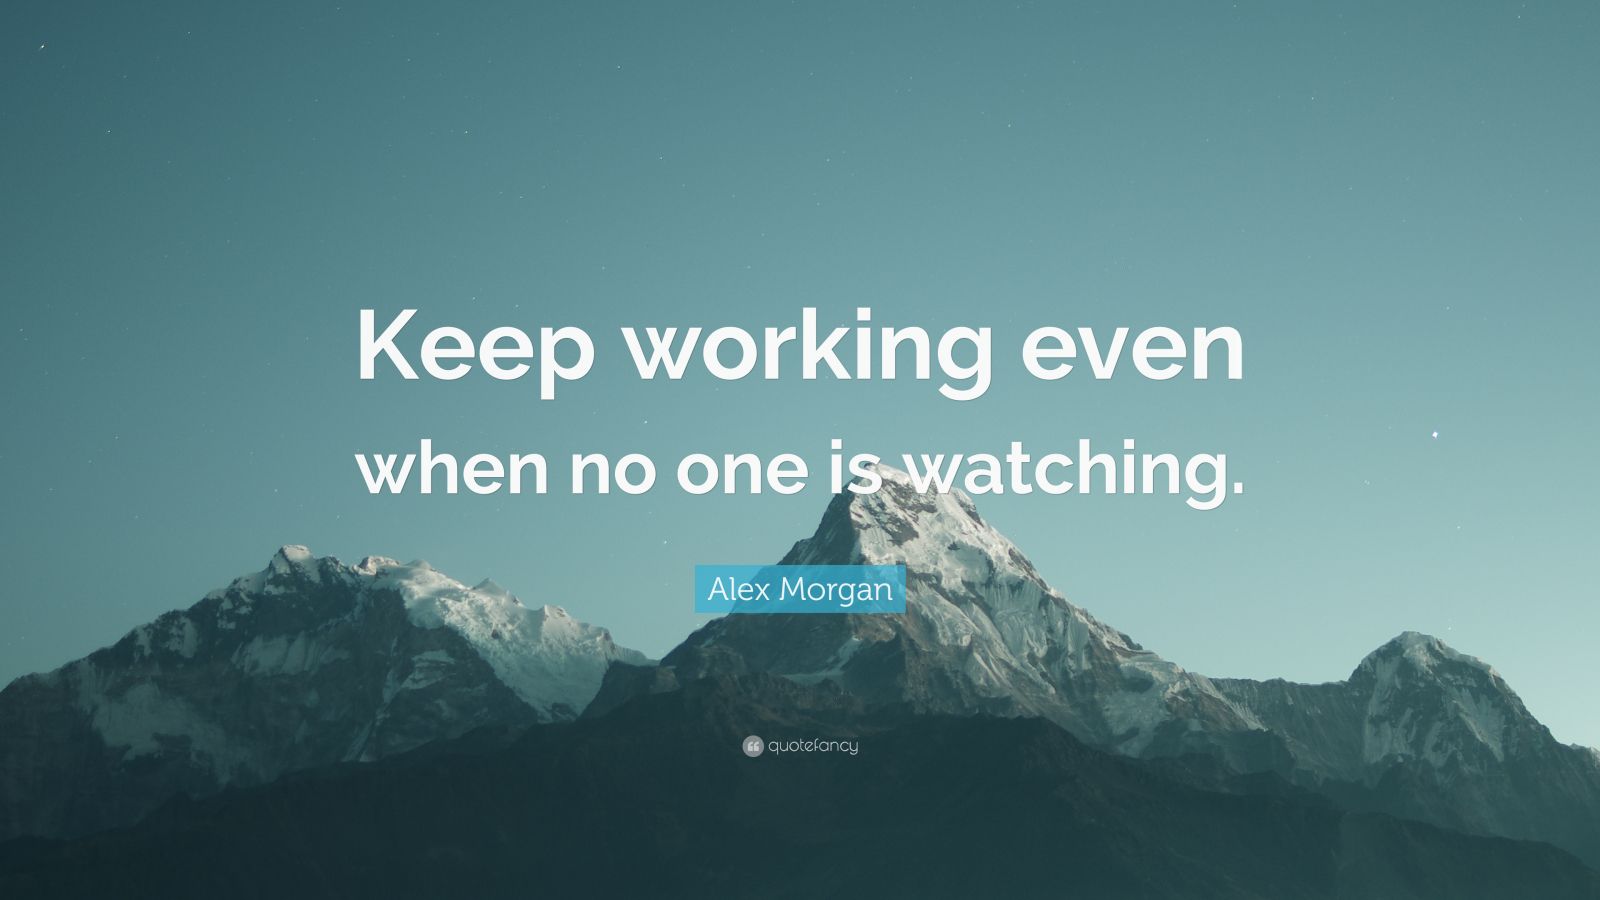 Alex Morgan Quote: “Keep working even when no one is watching.” (21